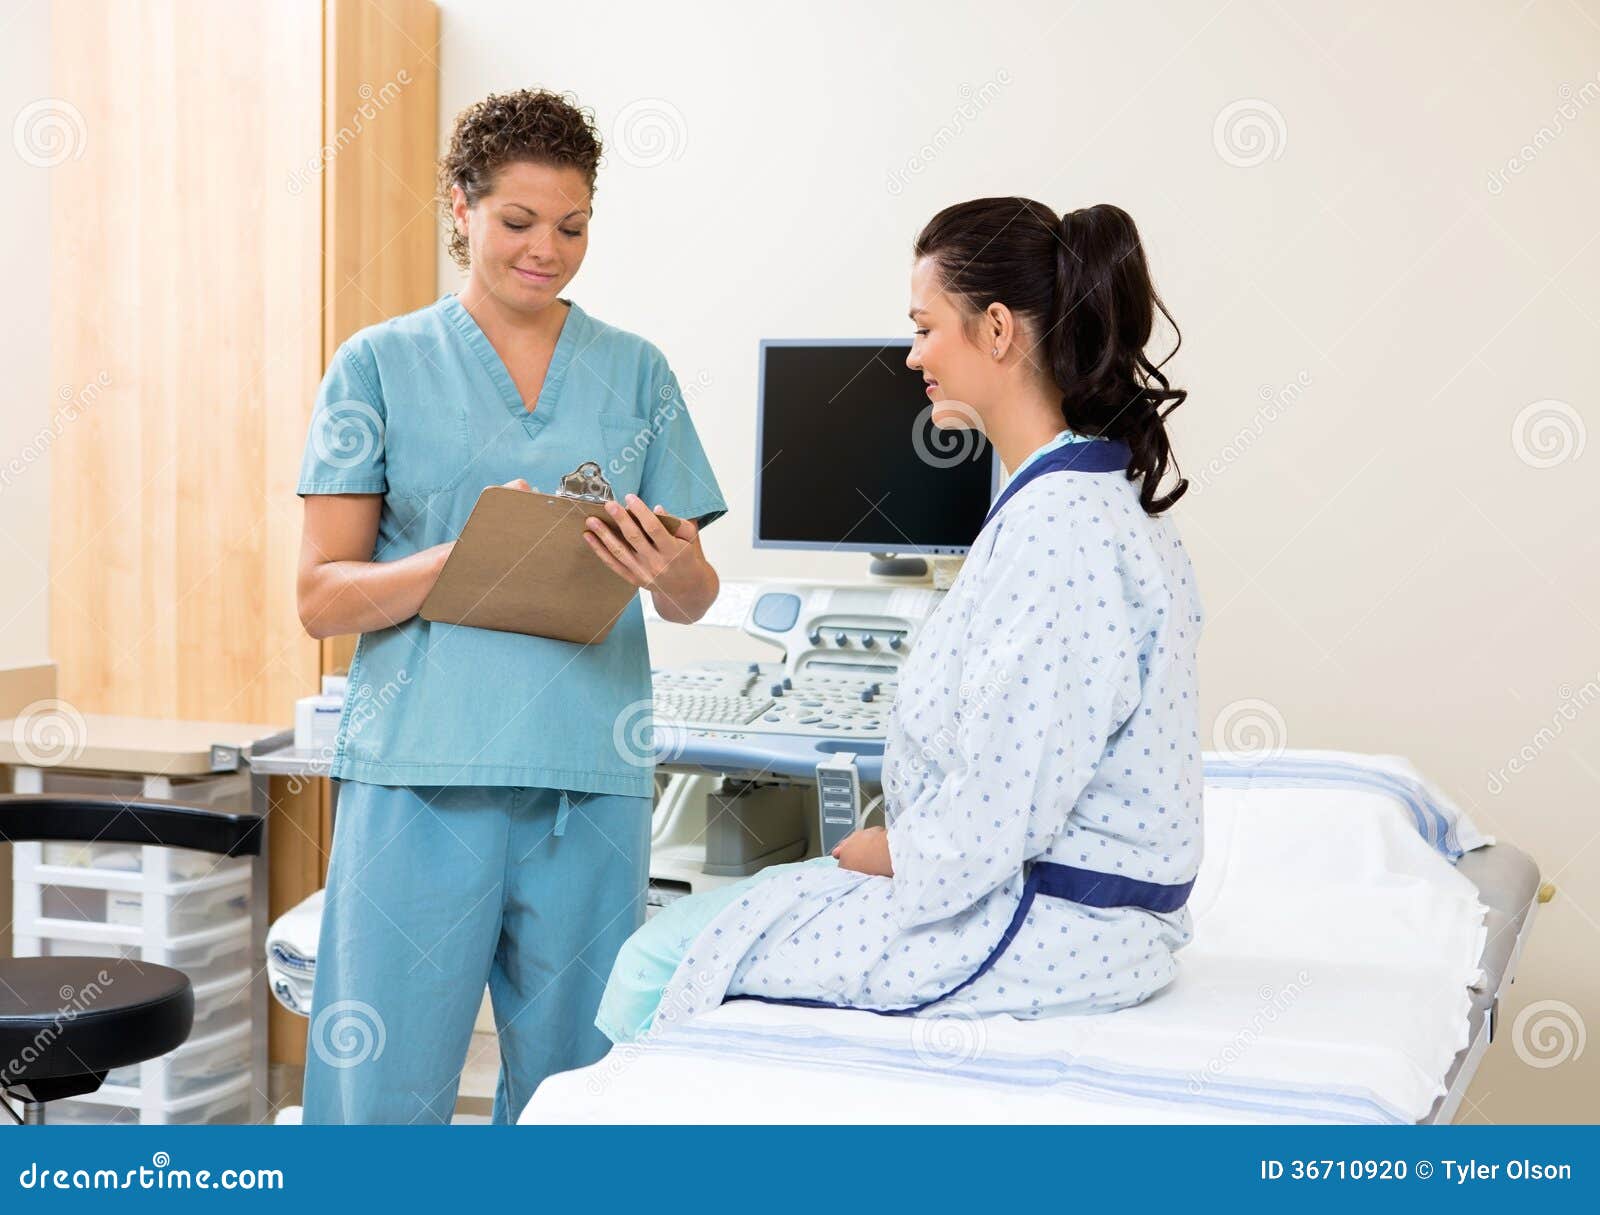 Nurse Writing Notes With Patient Sitting On Bed Stock